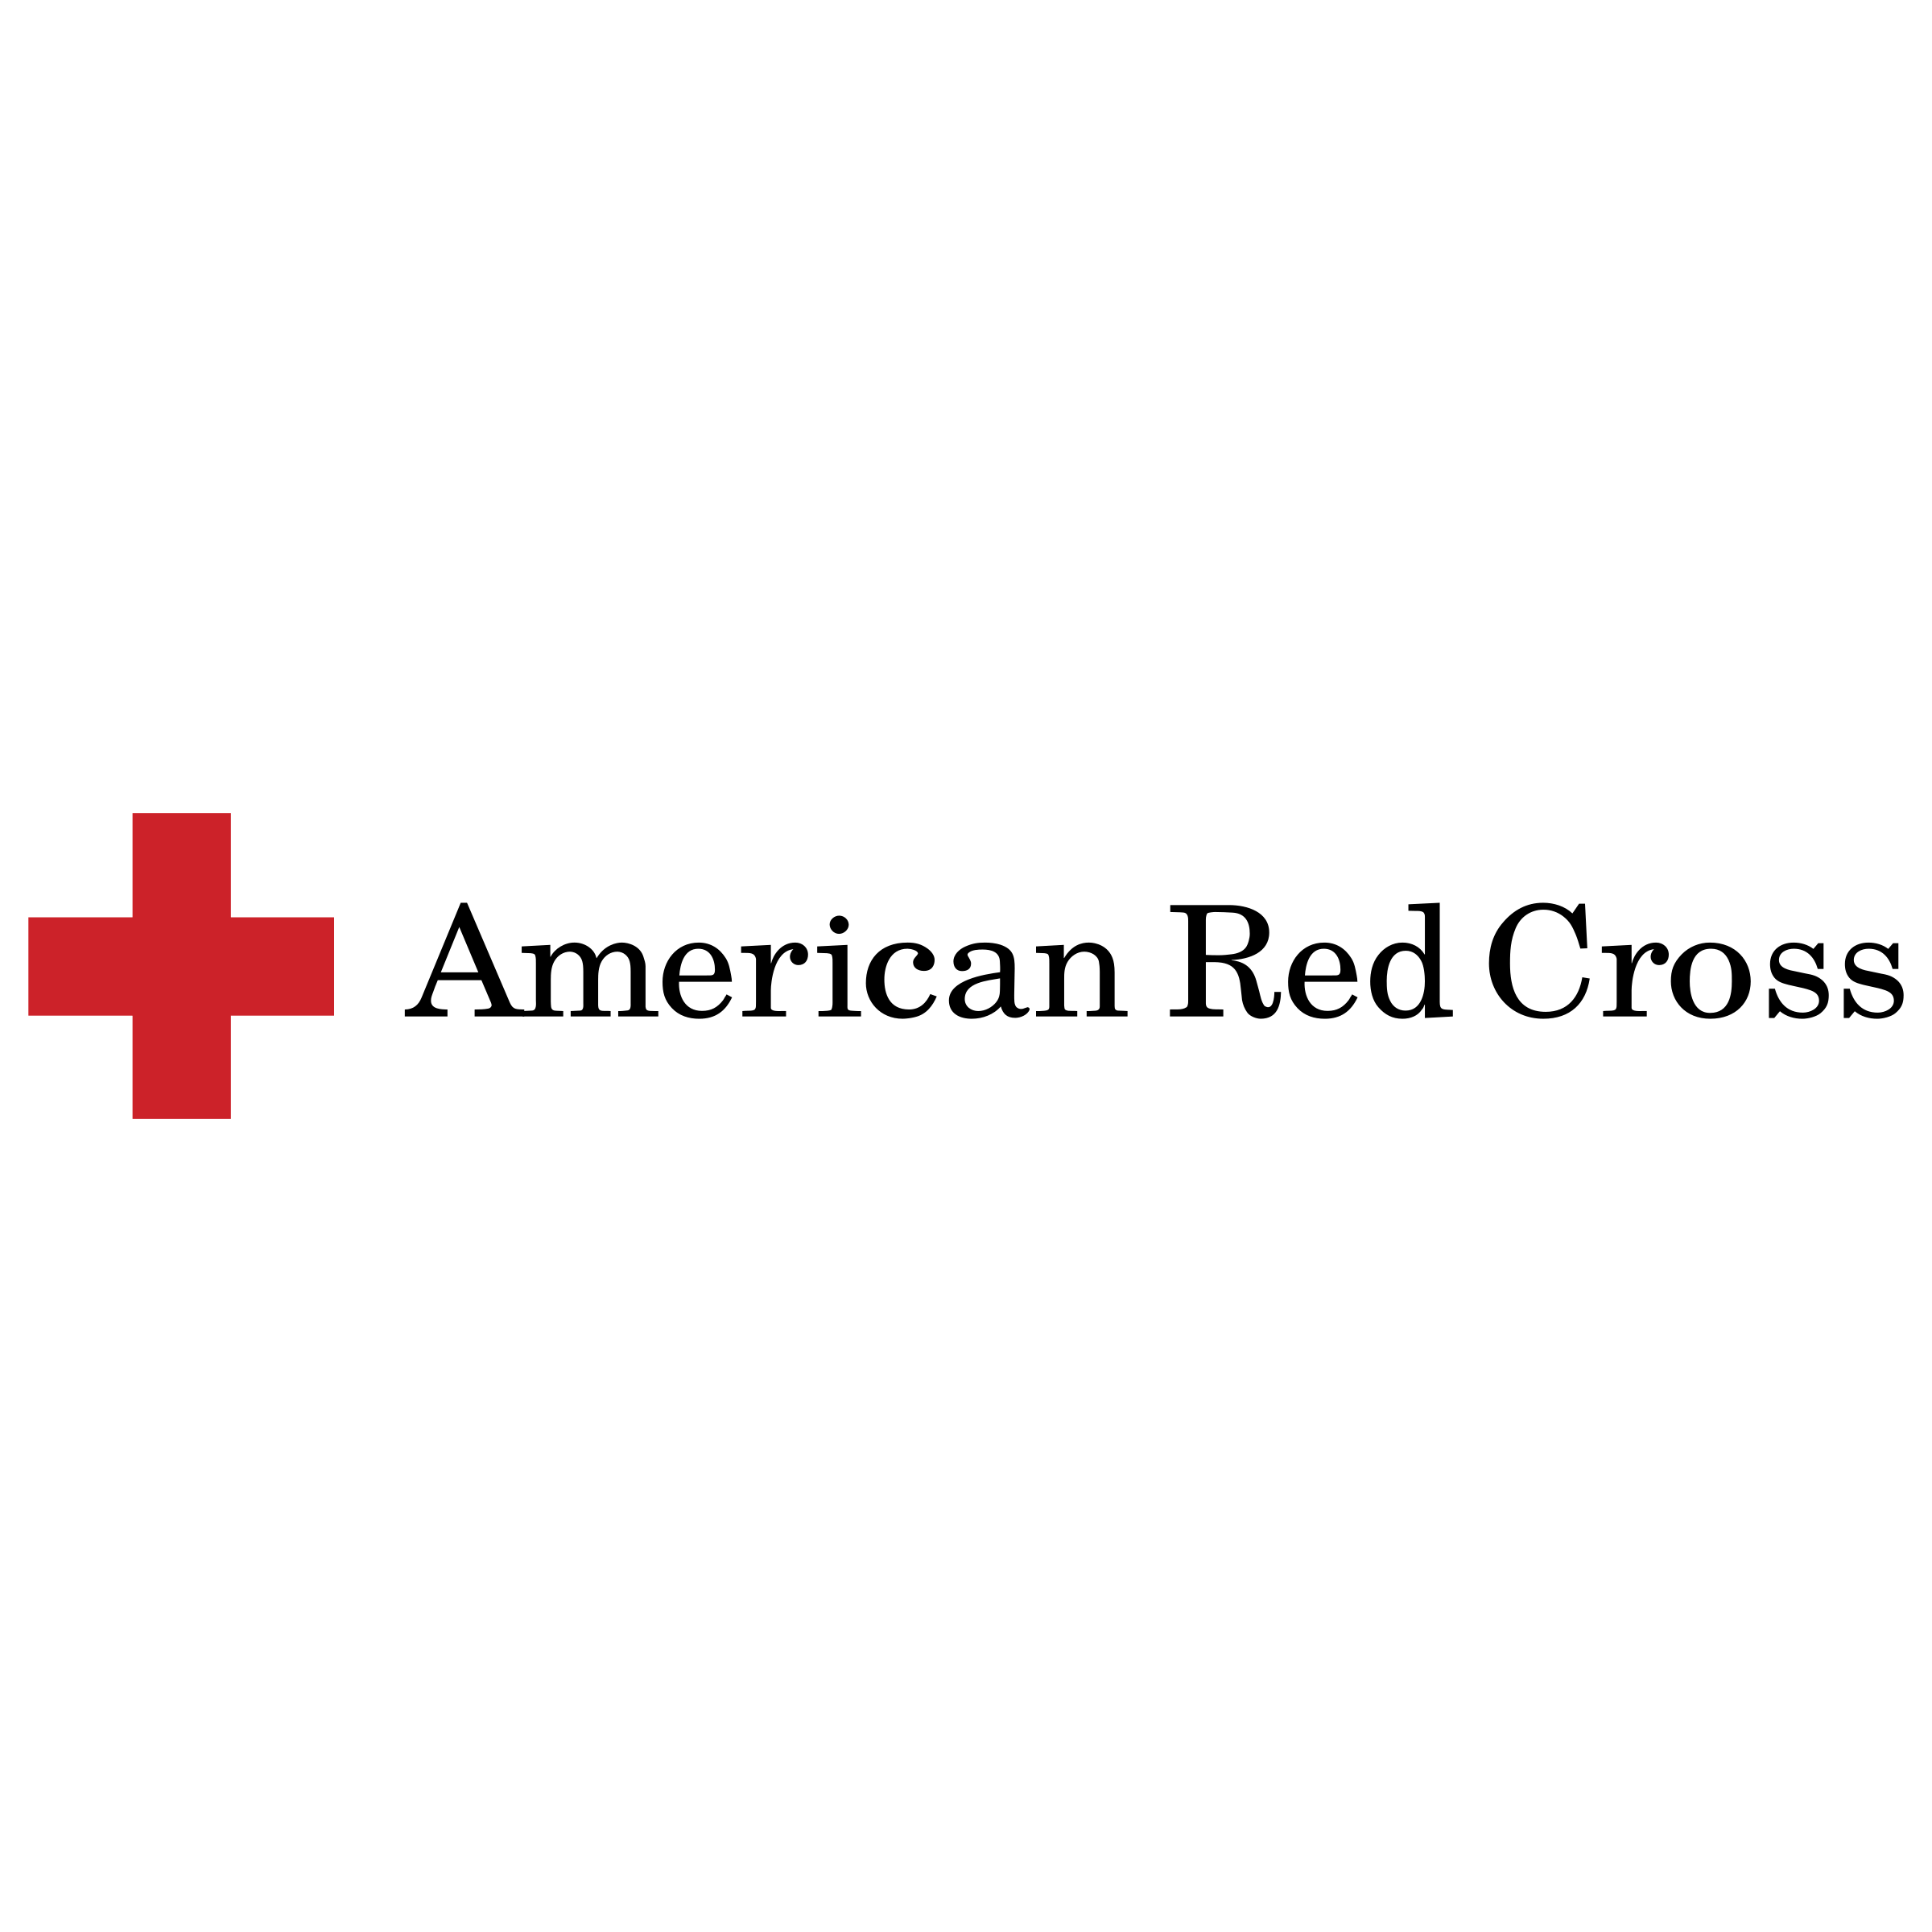 American Red Crss Logo - American Red Cross Logo PNG Transparent & SVG Vector - Freebie Supply